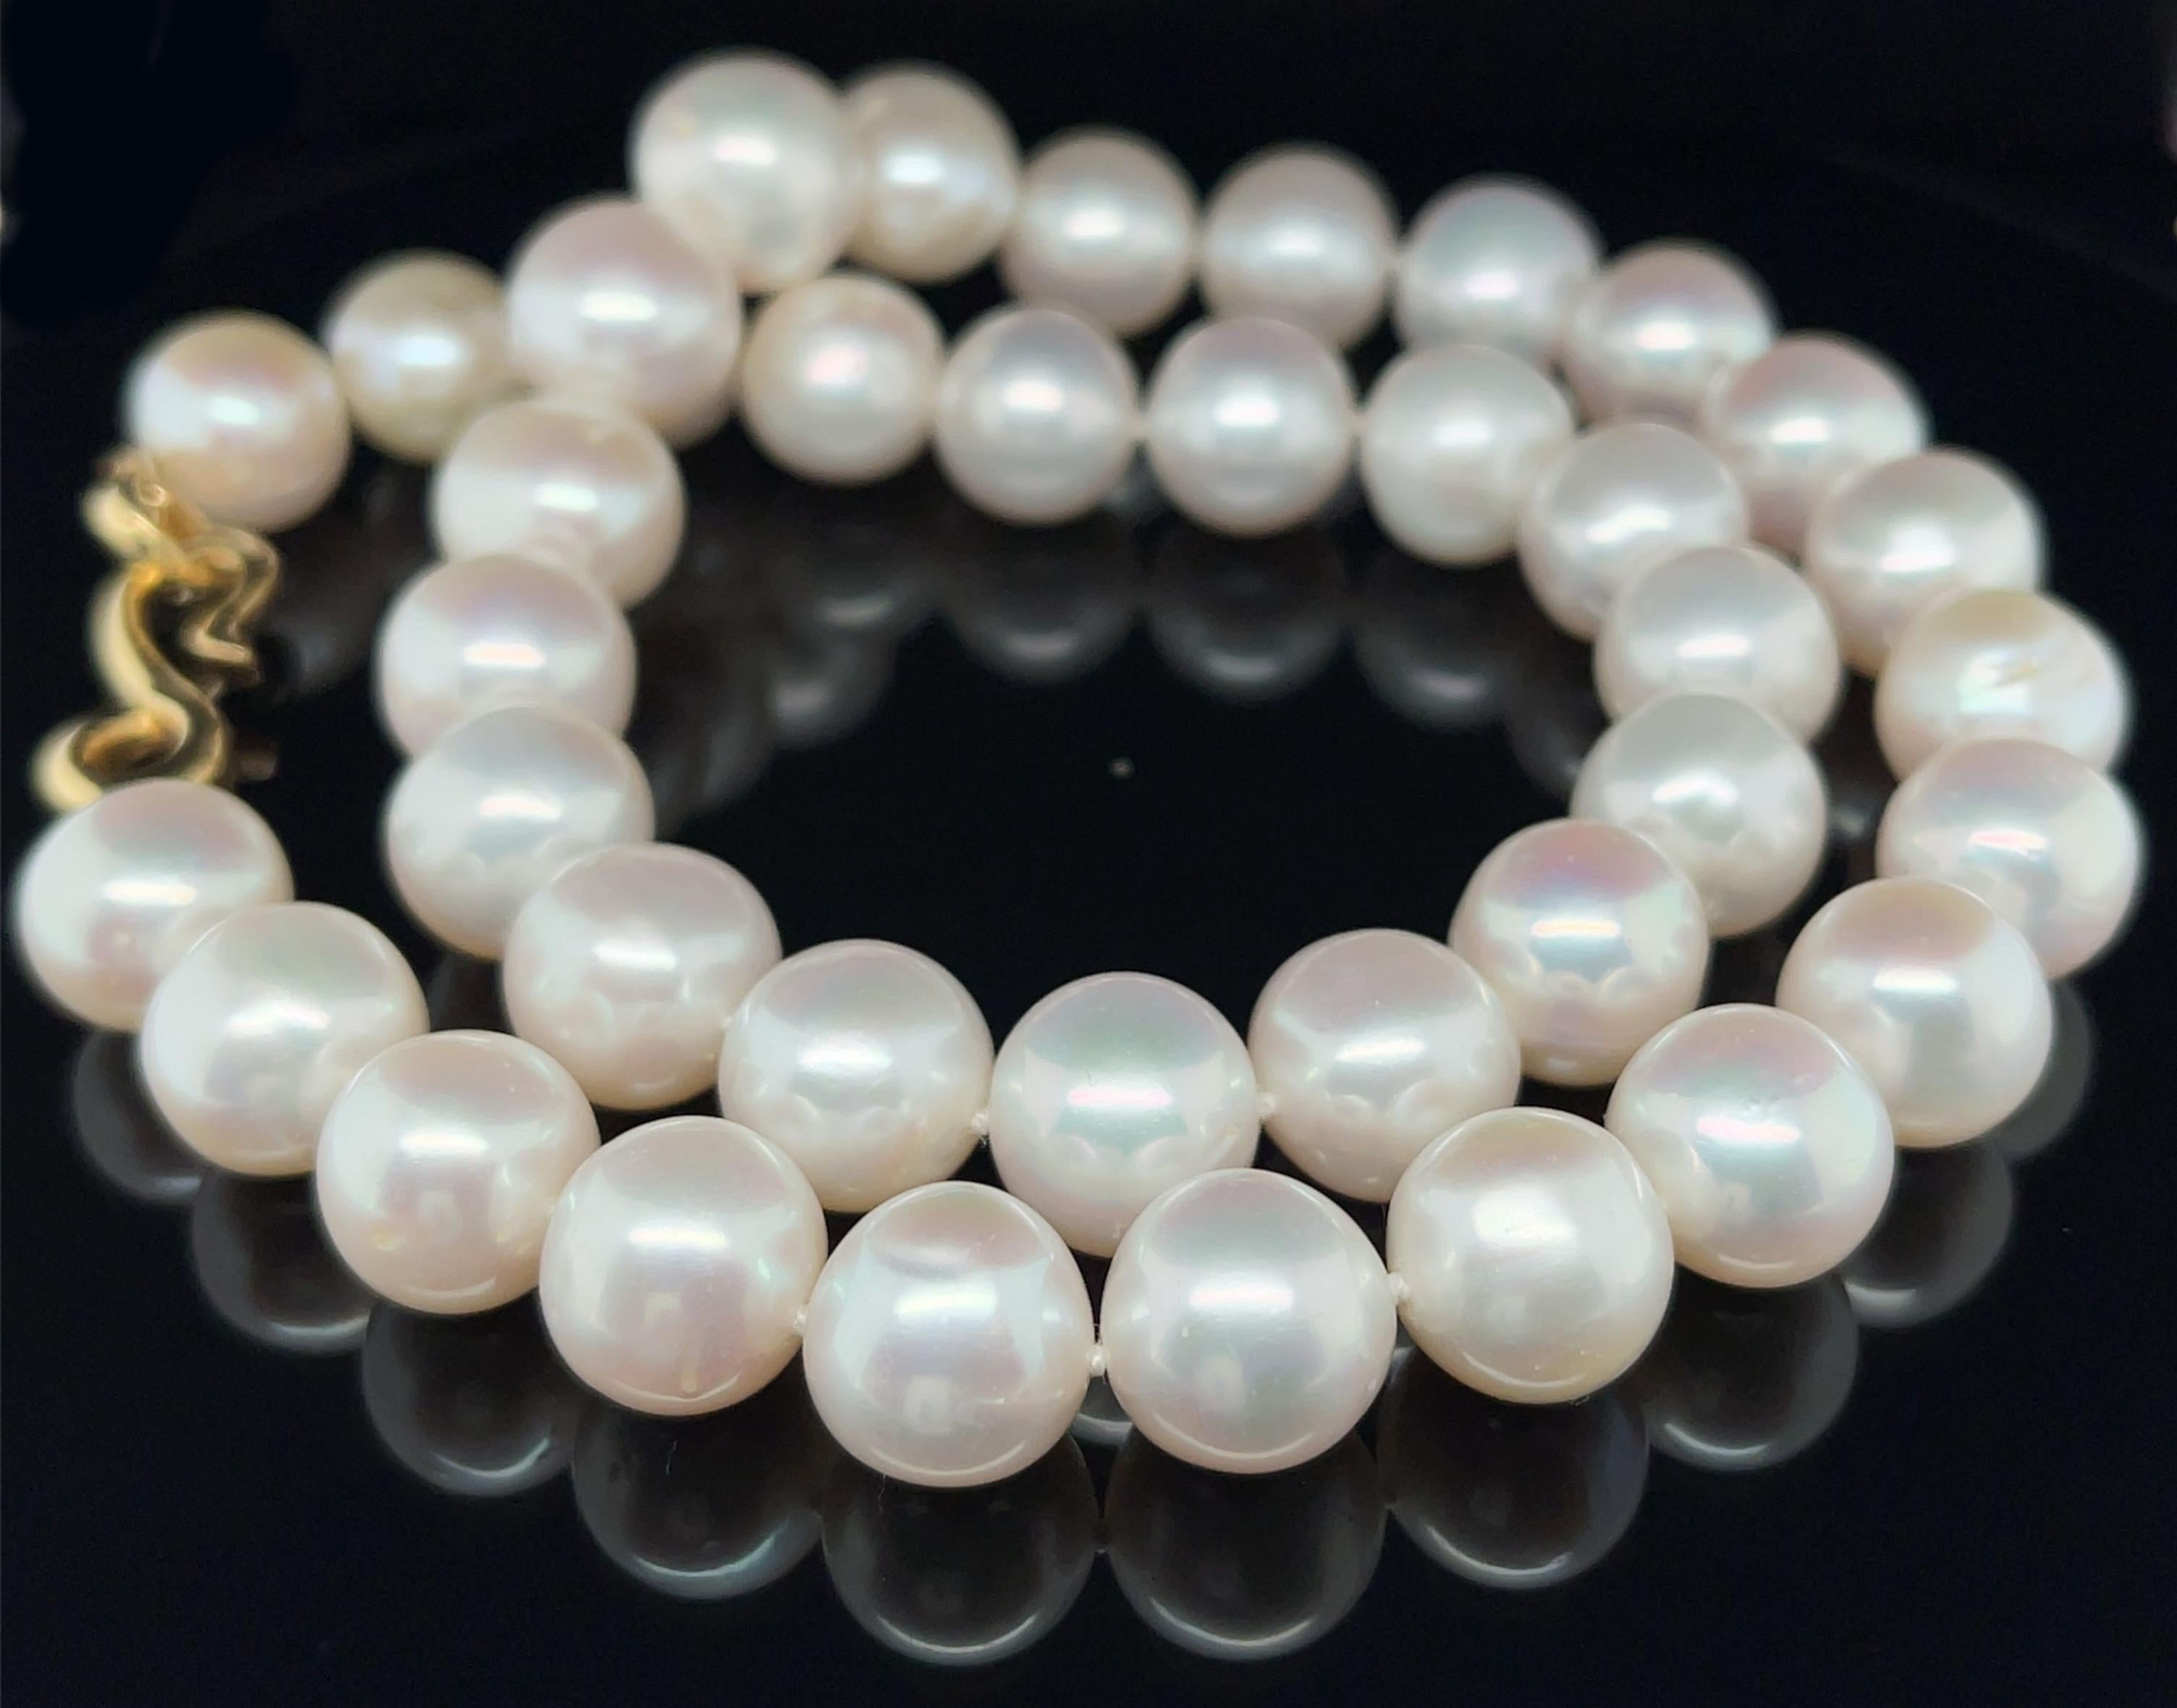 This stunning strand of white freshwater pearls gives the look of luxury at an affordable price! Featuring 38 slightly oval shaped pearls with beautiful luster, this strand measures 18 inches long and is finished with an 18k yellow gold 